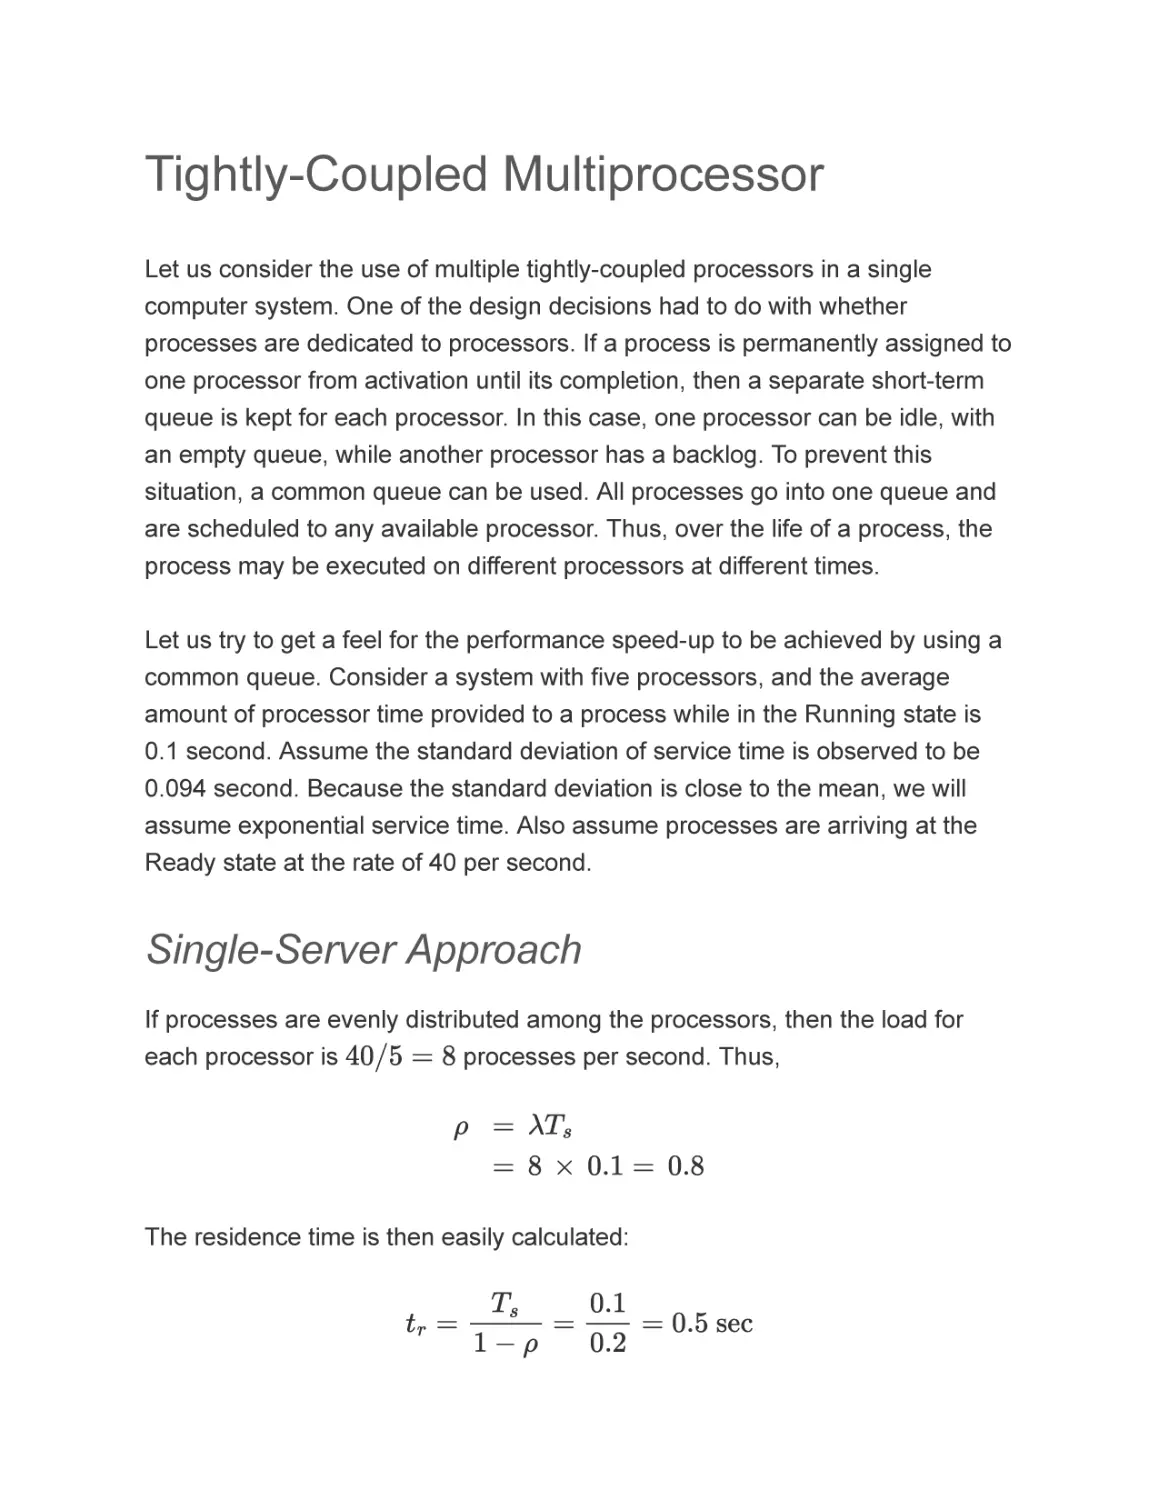 Tightly-Coupled Multiprocessor
Single-Server Approach